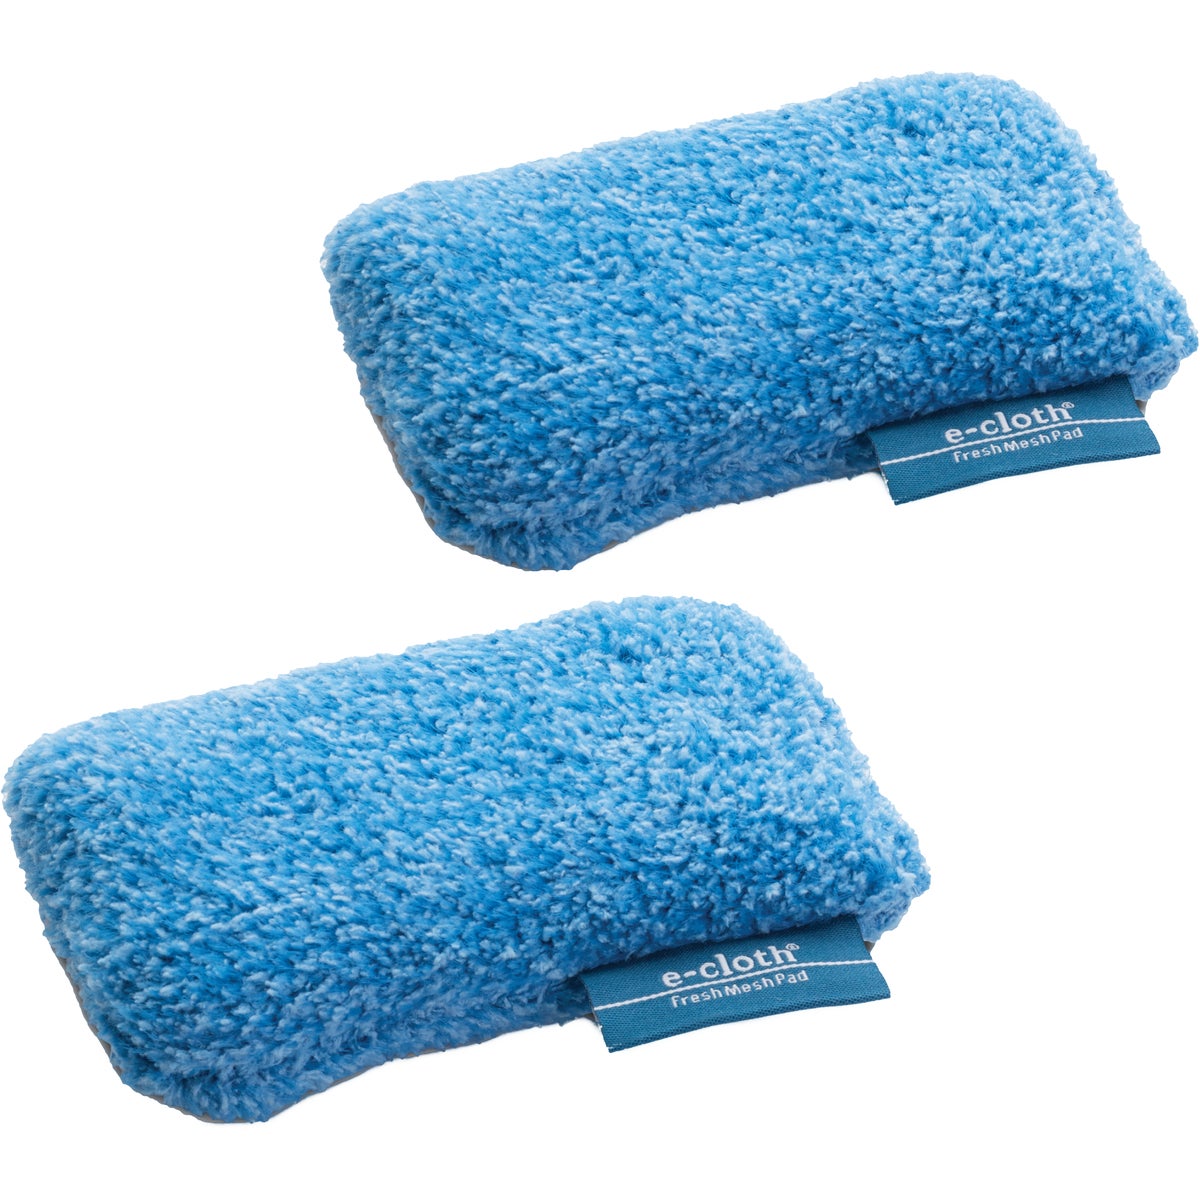 E-Cloth 3 In. x 6 In. Fresh Mesh Cleansing Pad (2-Count)